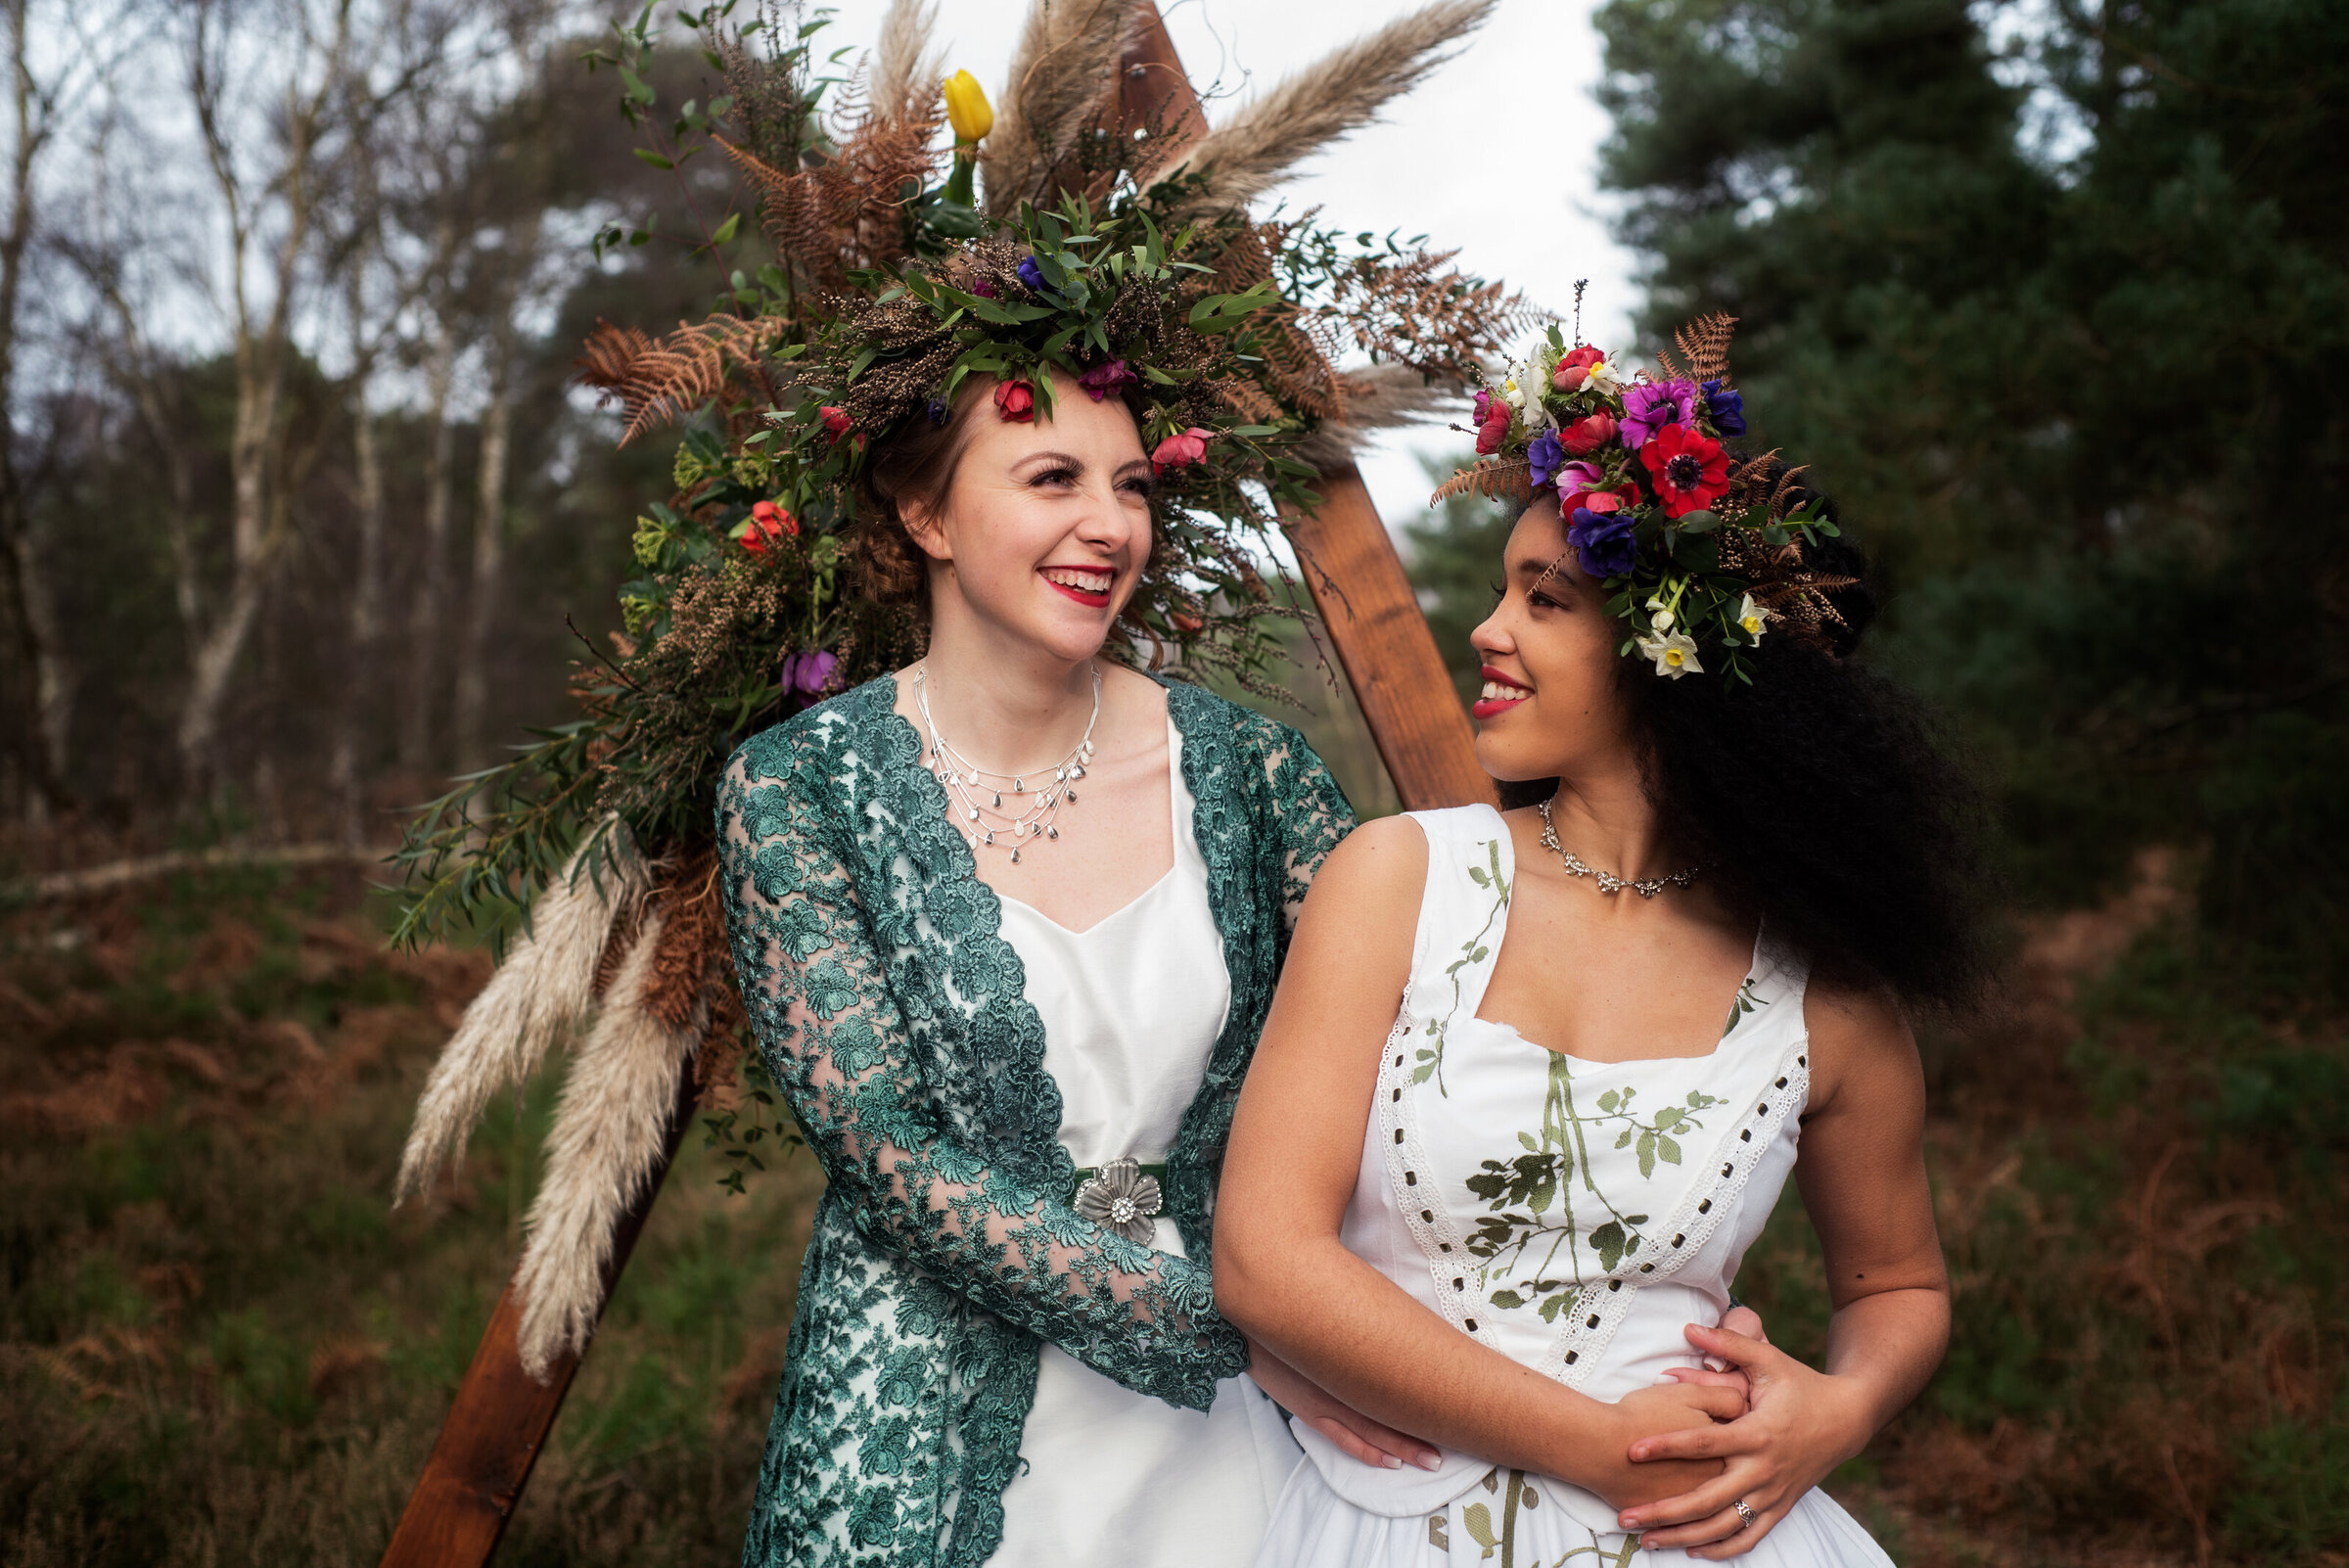 A pair of brides, clad in unique handmade upcycled wedding gowns, share a playful and loving glance in a whimsical forest setting, stood in front of their wedding arch adorned with vibrant and intricate florals. Both wearing floral crowns as they celebrate their elopement surrounded by the natural beauty of the woods.